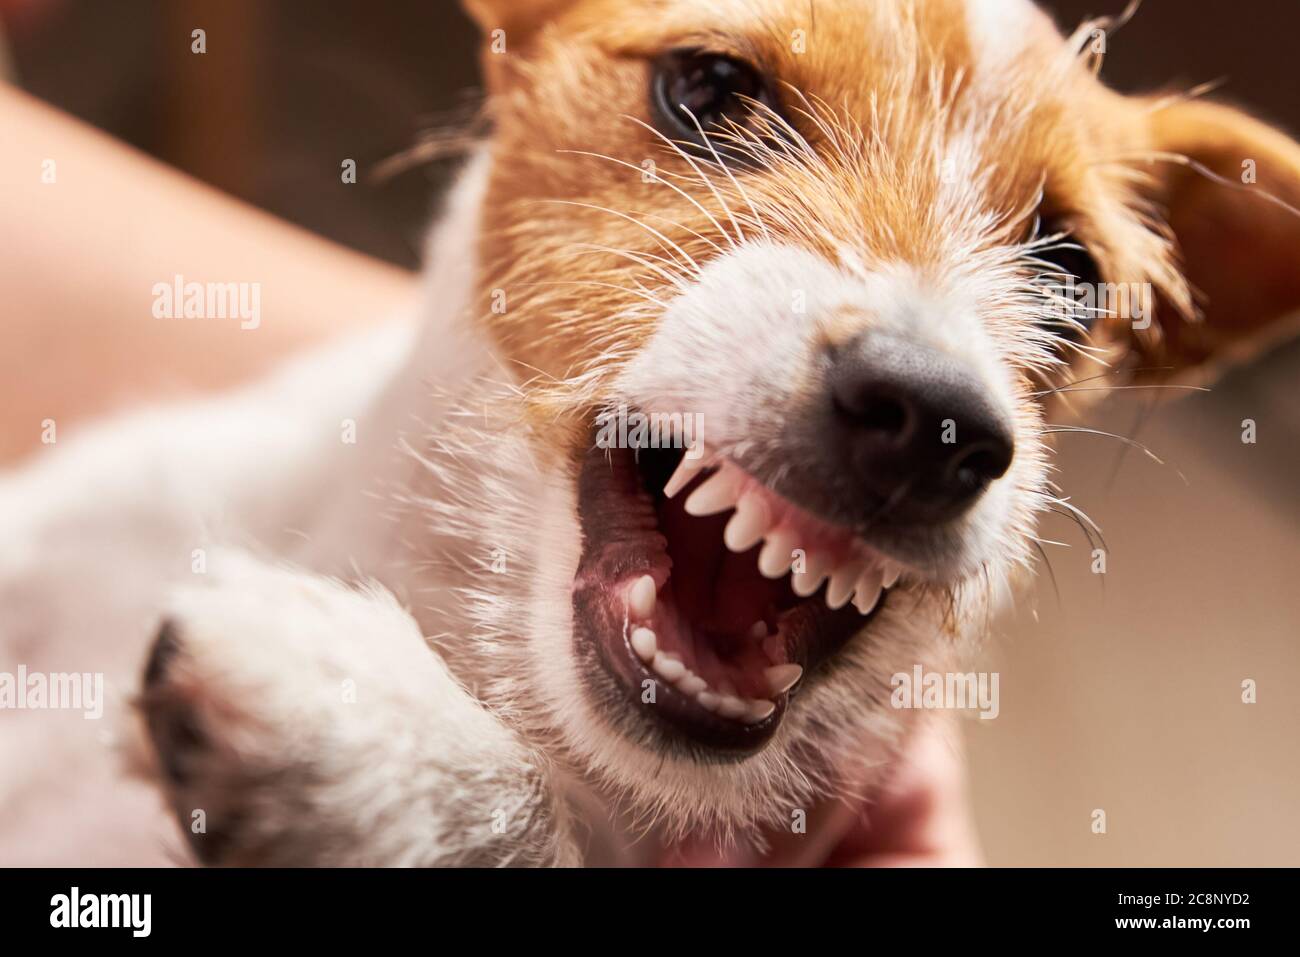 Aggressive dog with a bared fangs. Grinning puppy Jack Russell terrier Stock Photo